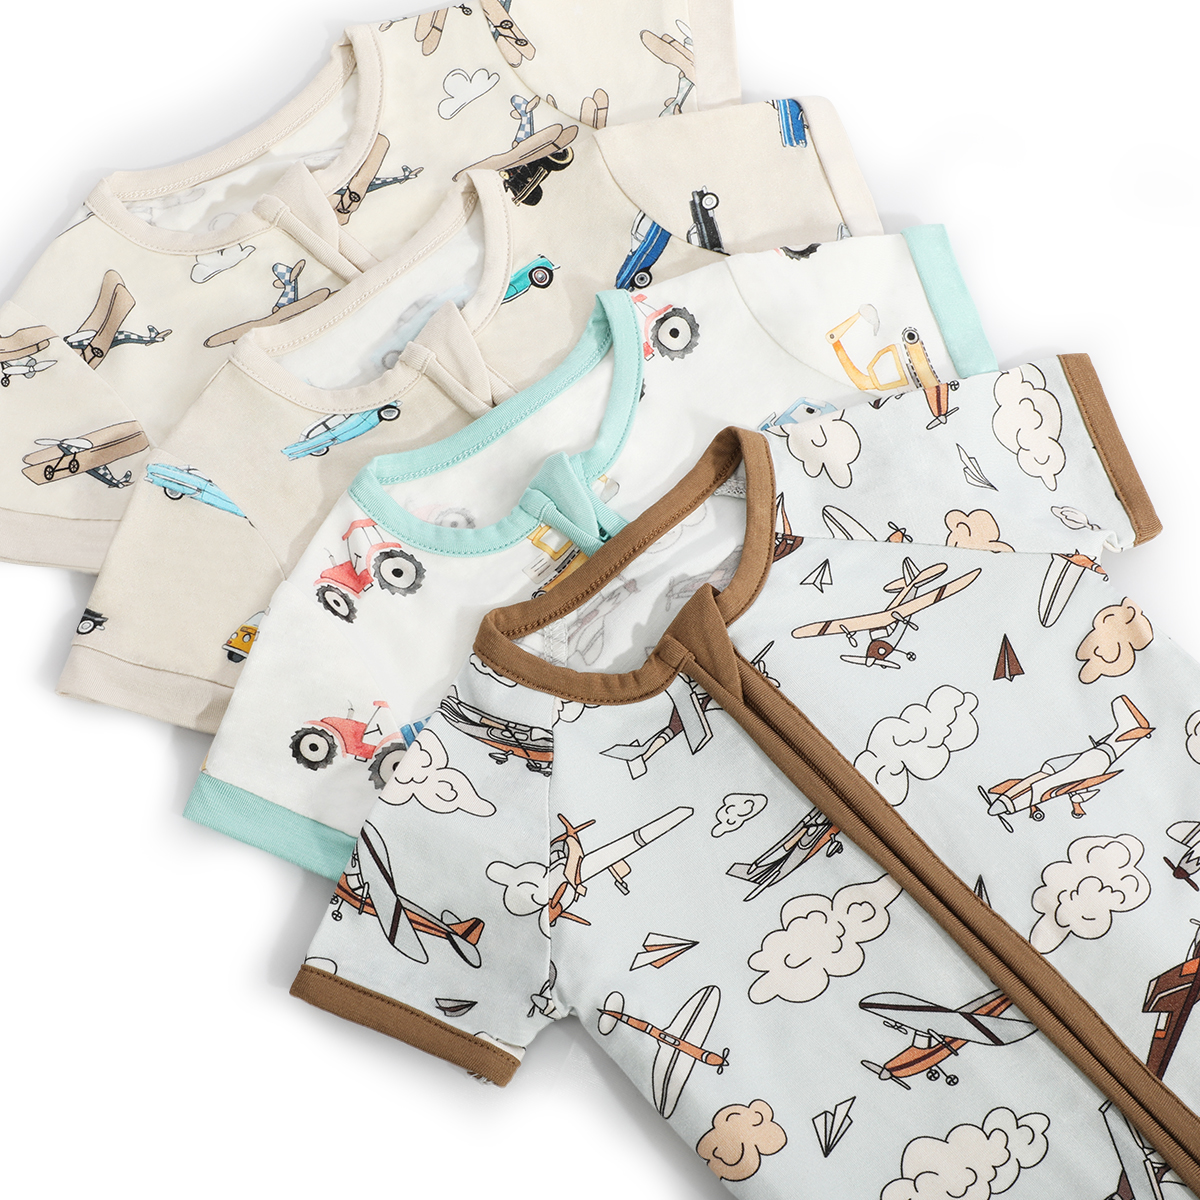 Transport your baby in style with our bamboo fiber clothing collection inspired by the whimsical world of transportation! 🚂🚗🚲
Explore the journey with #FancyPrince - where comfort meets creativity! 
#baby #bamboo #bamboofabric #bamboobaby #babypajamas #pajamas  #sleepsuit